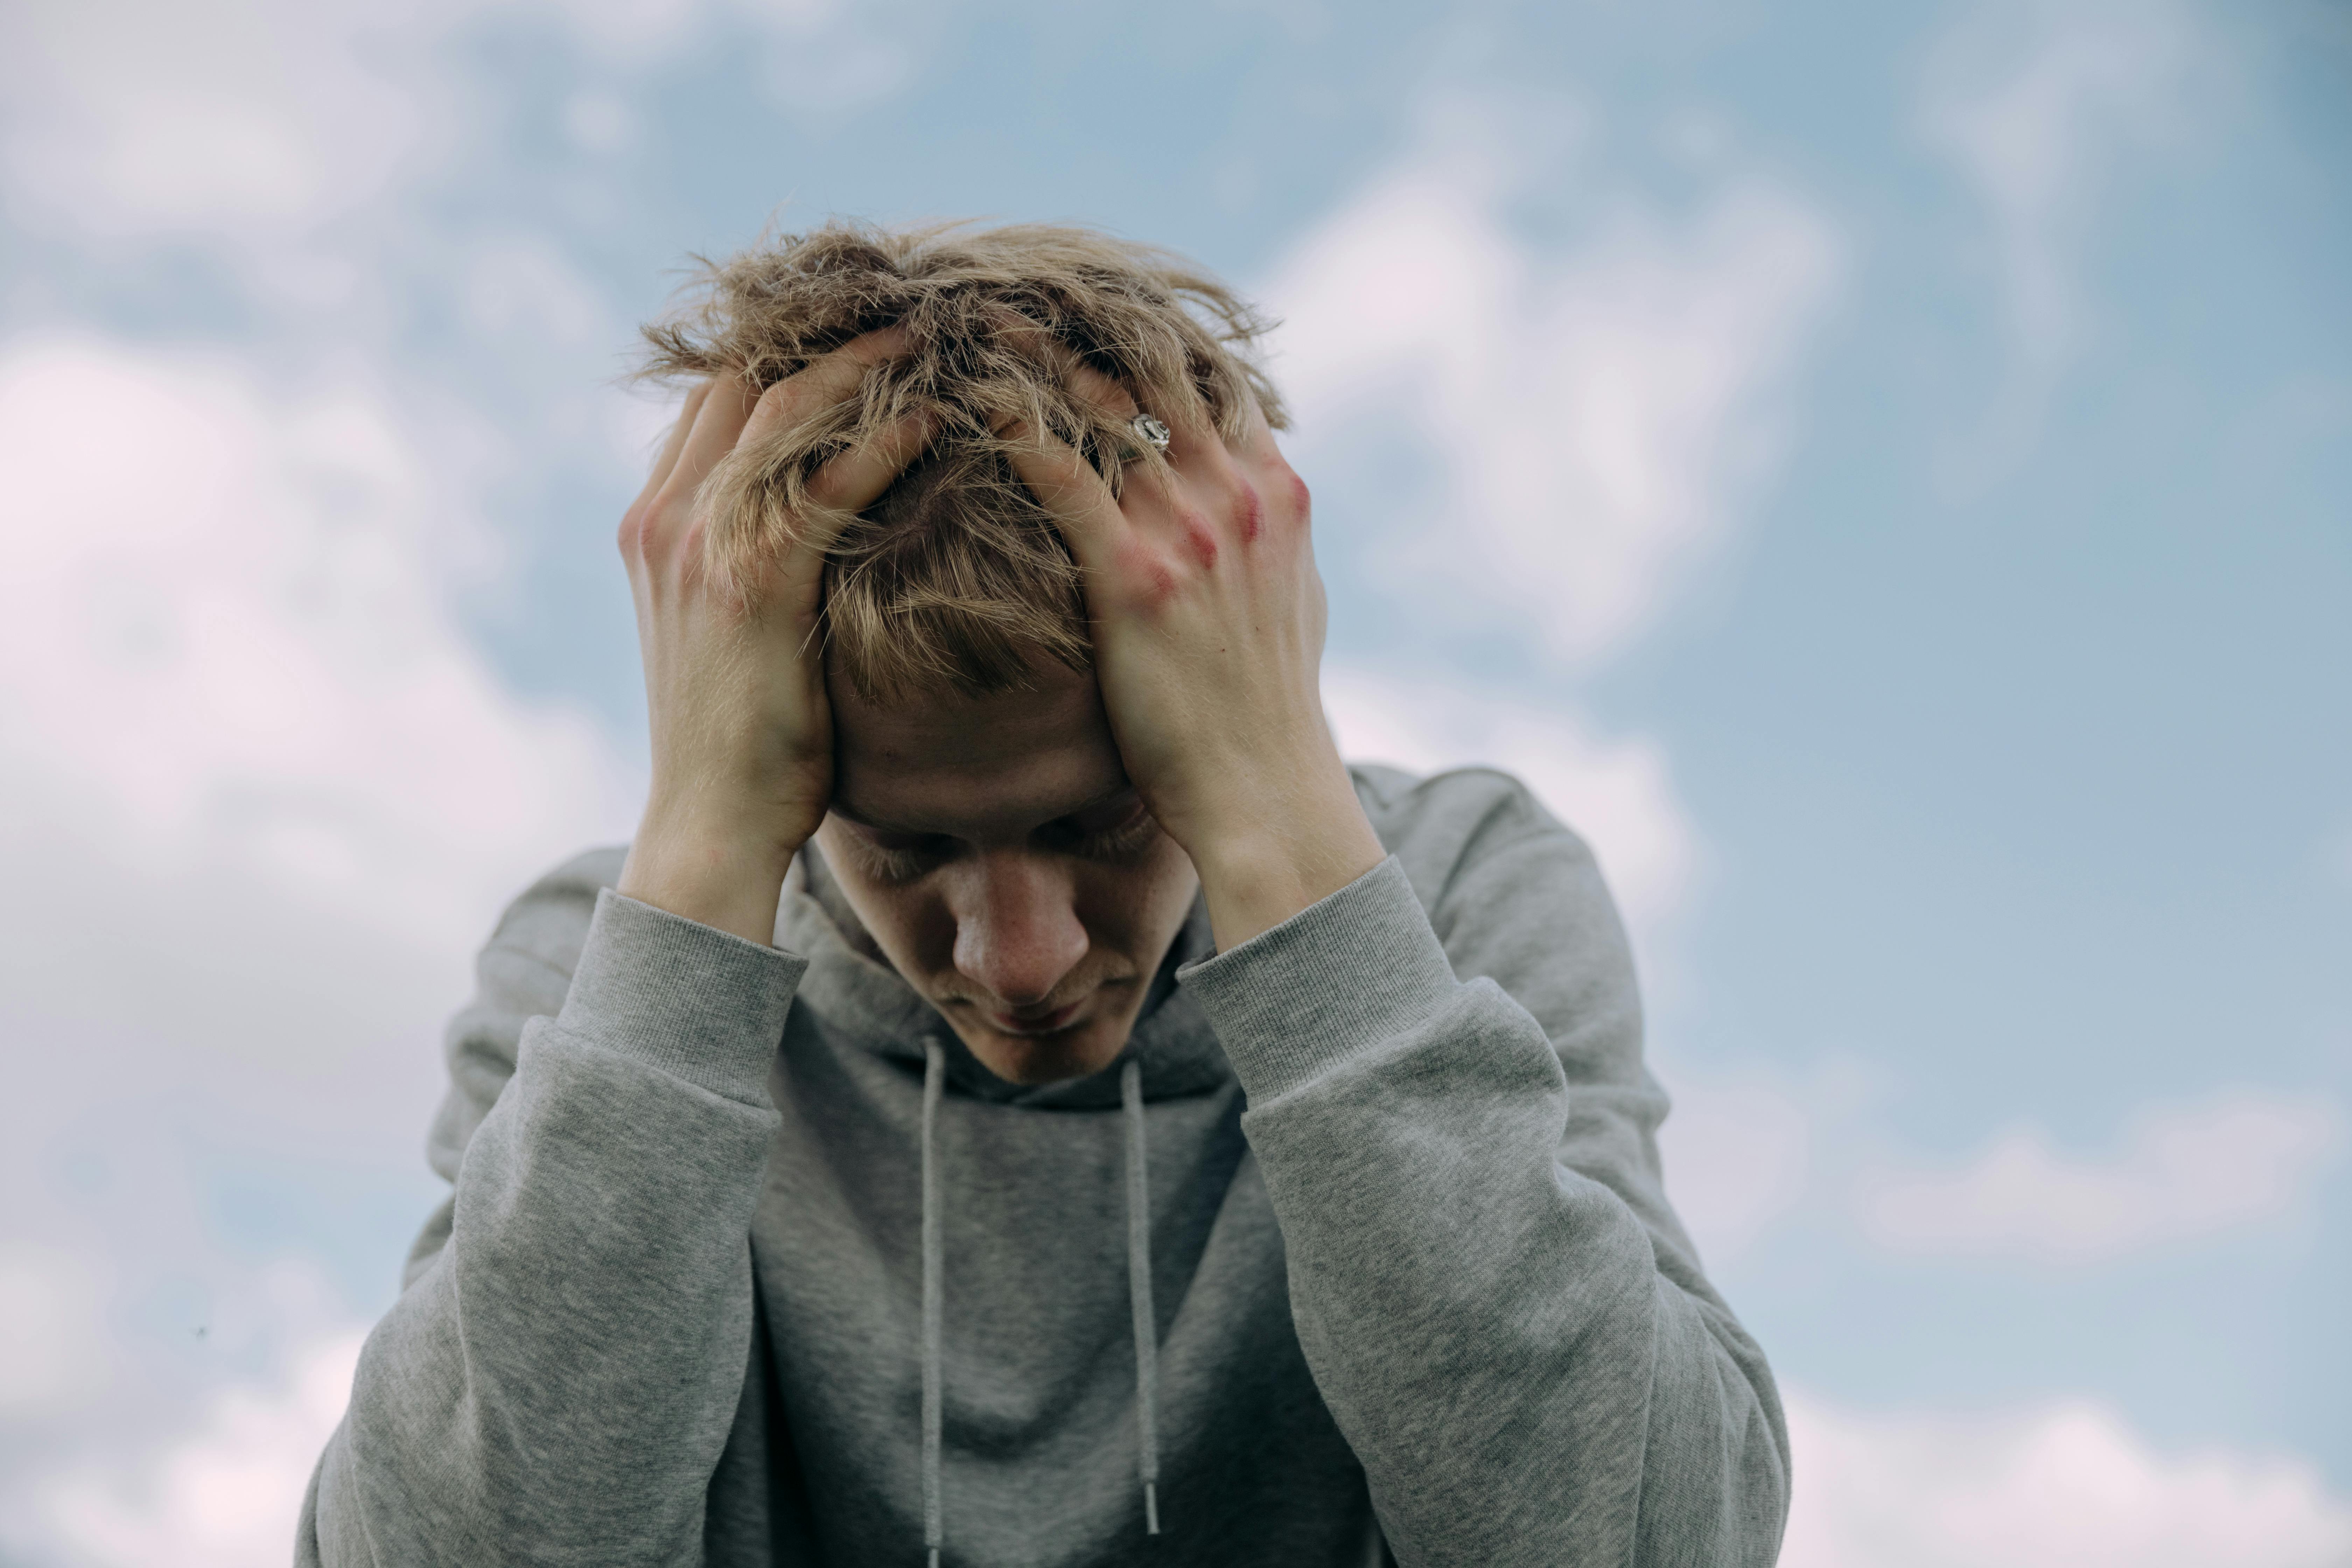 A frustrated man running his hands through his hair | Source: Pexels